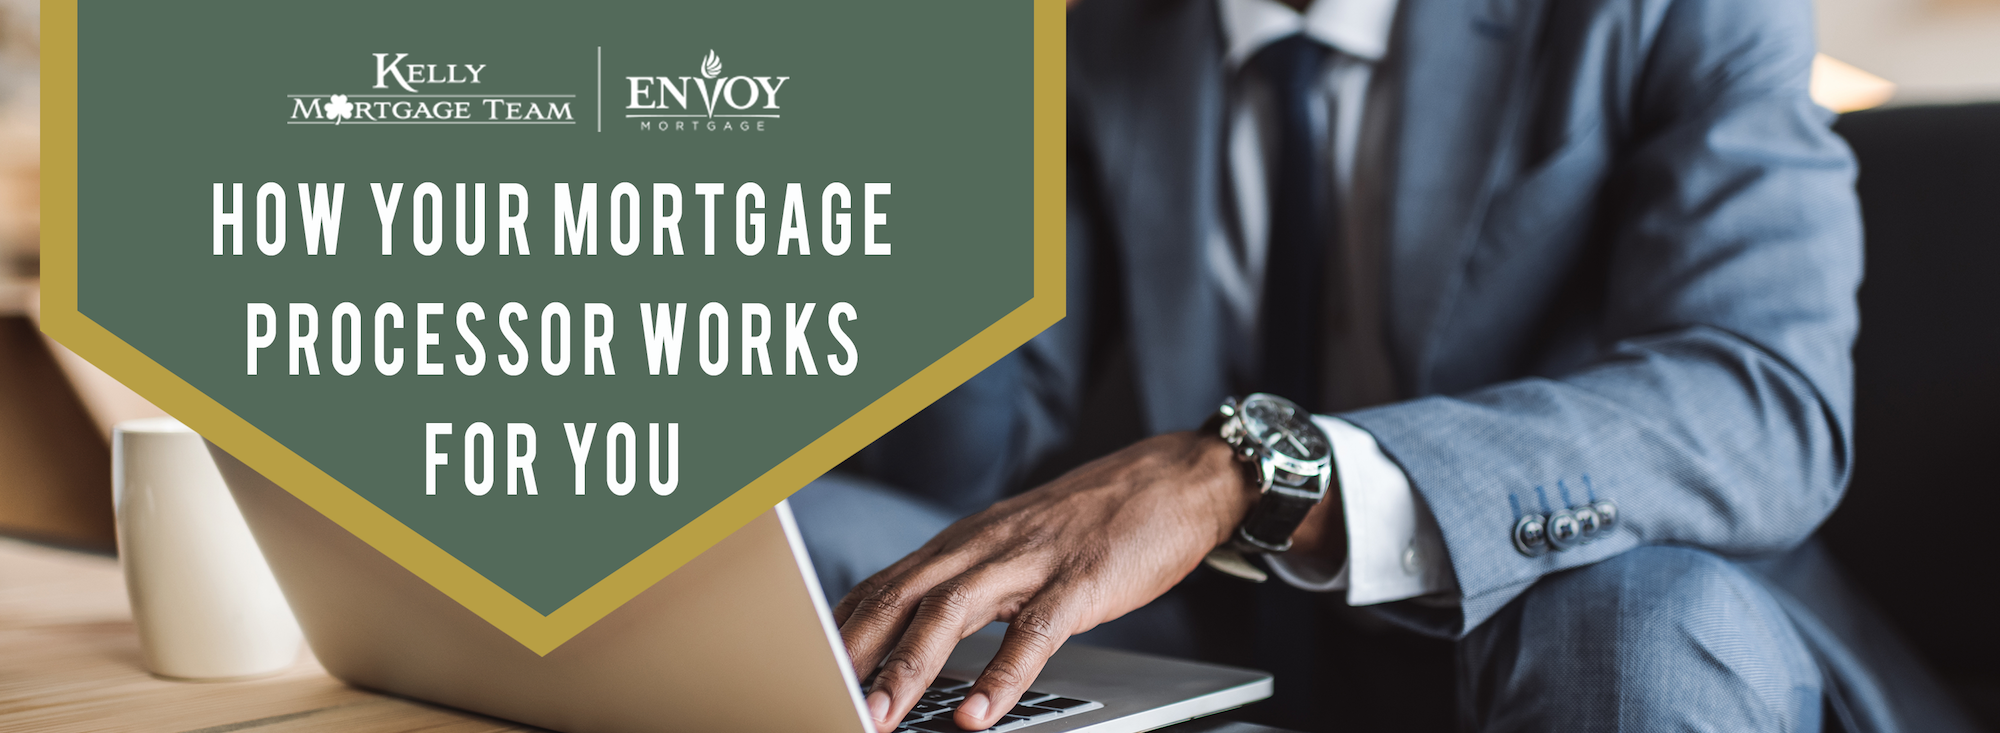 How Your Mortgage Processor Works for You